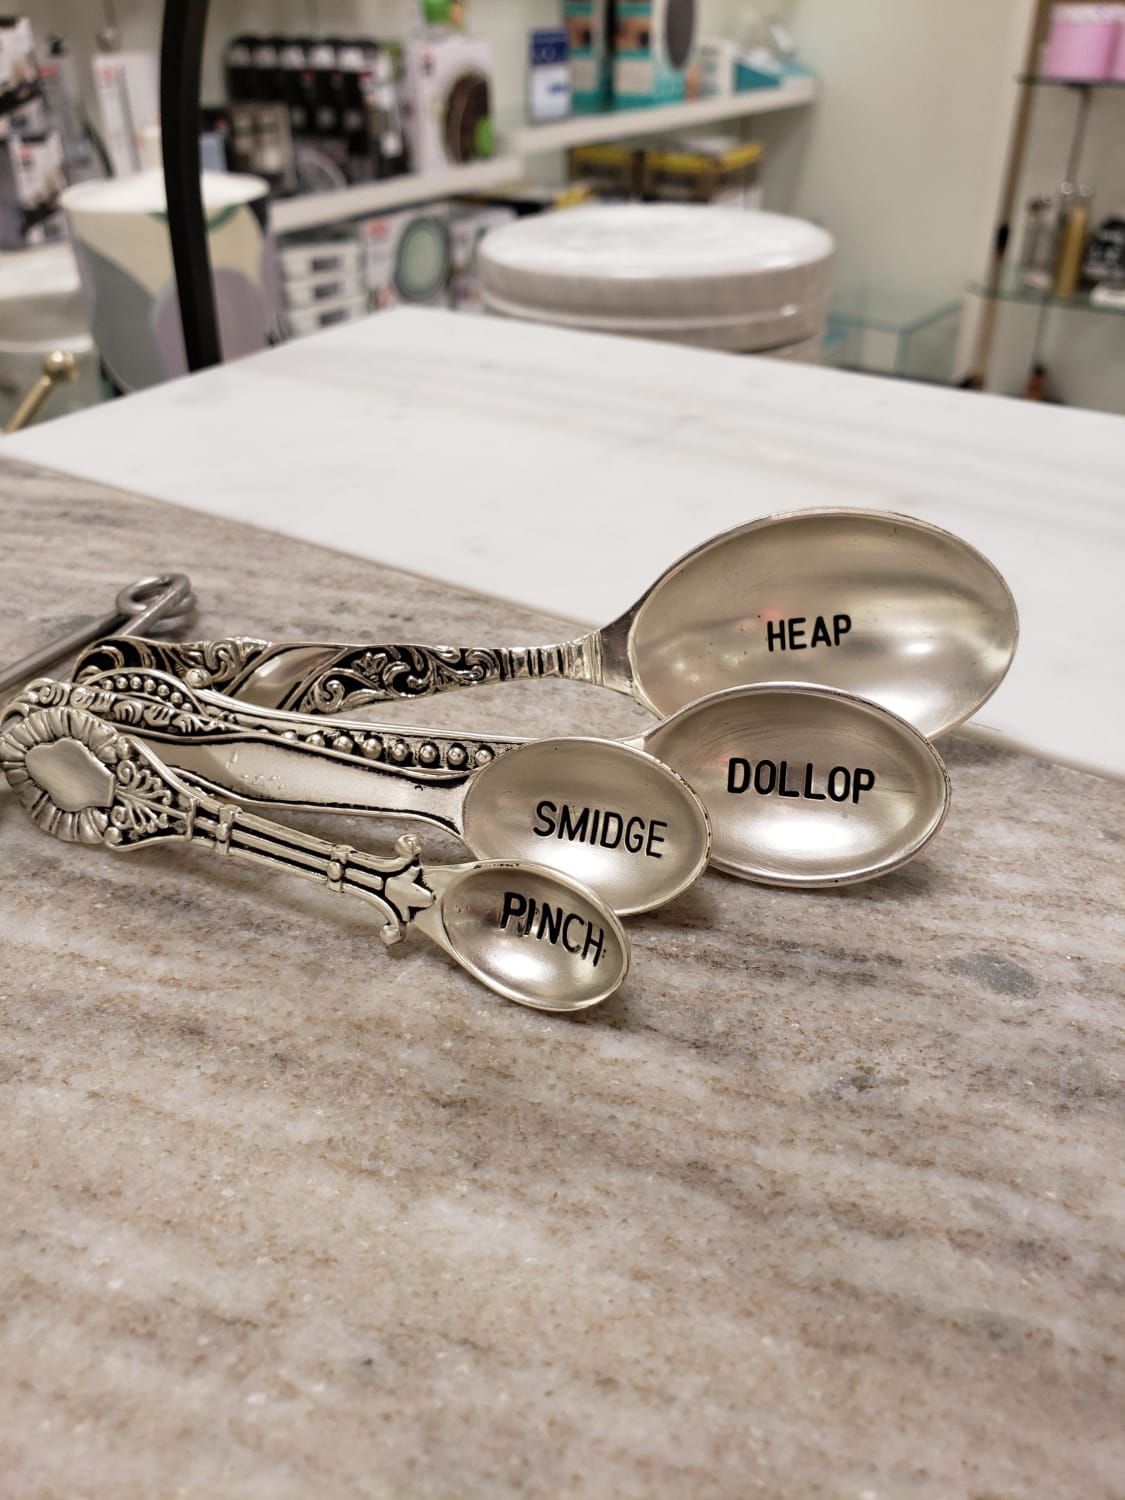 I found these measuring spoons that are labeled in grandma terms!